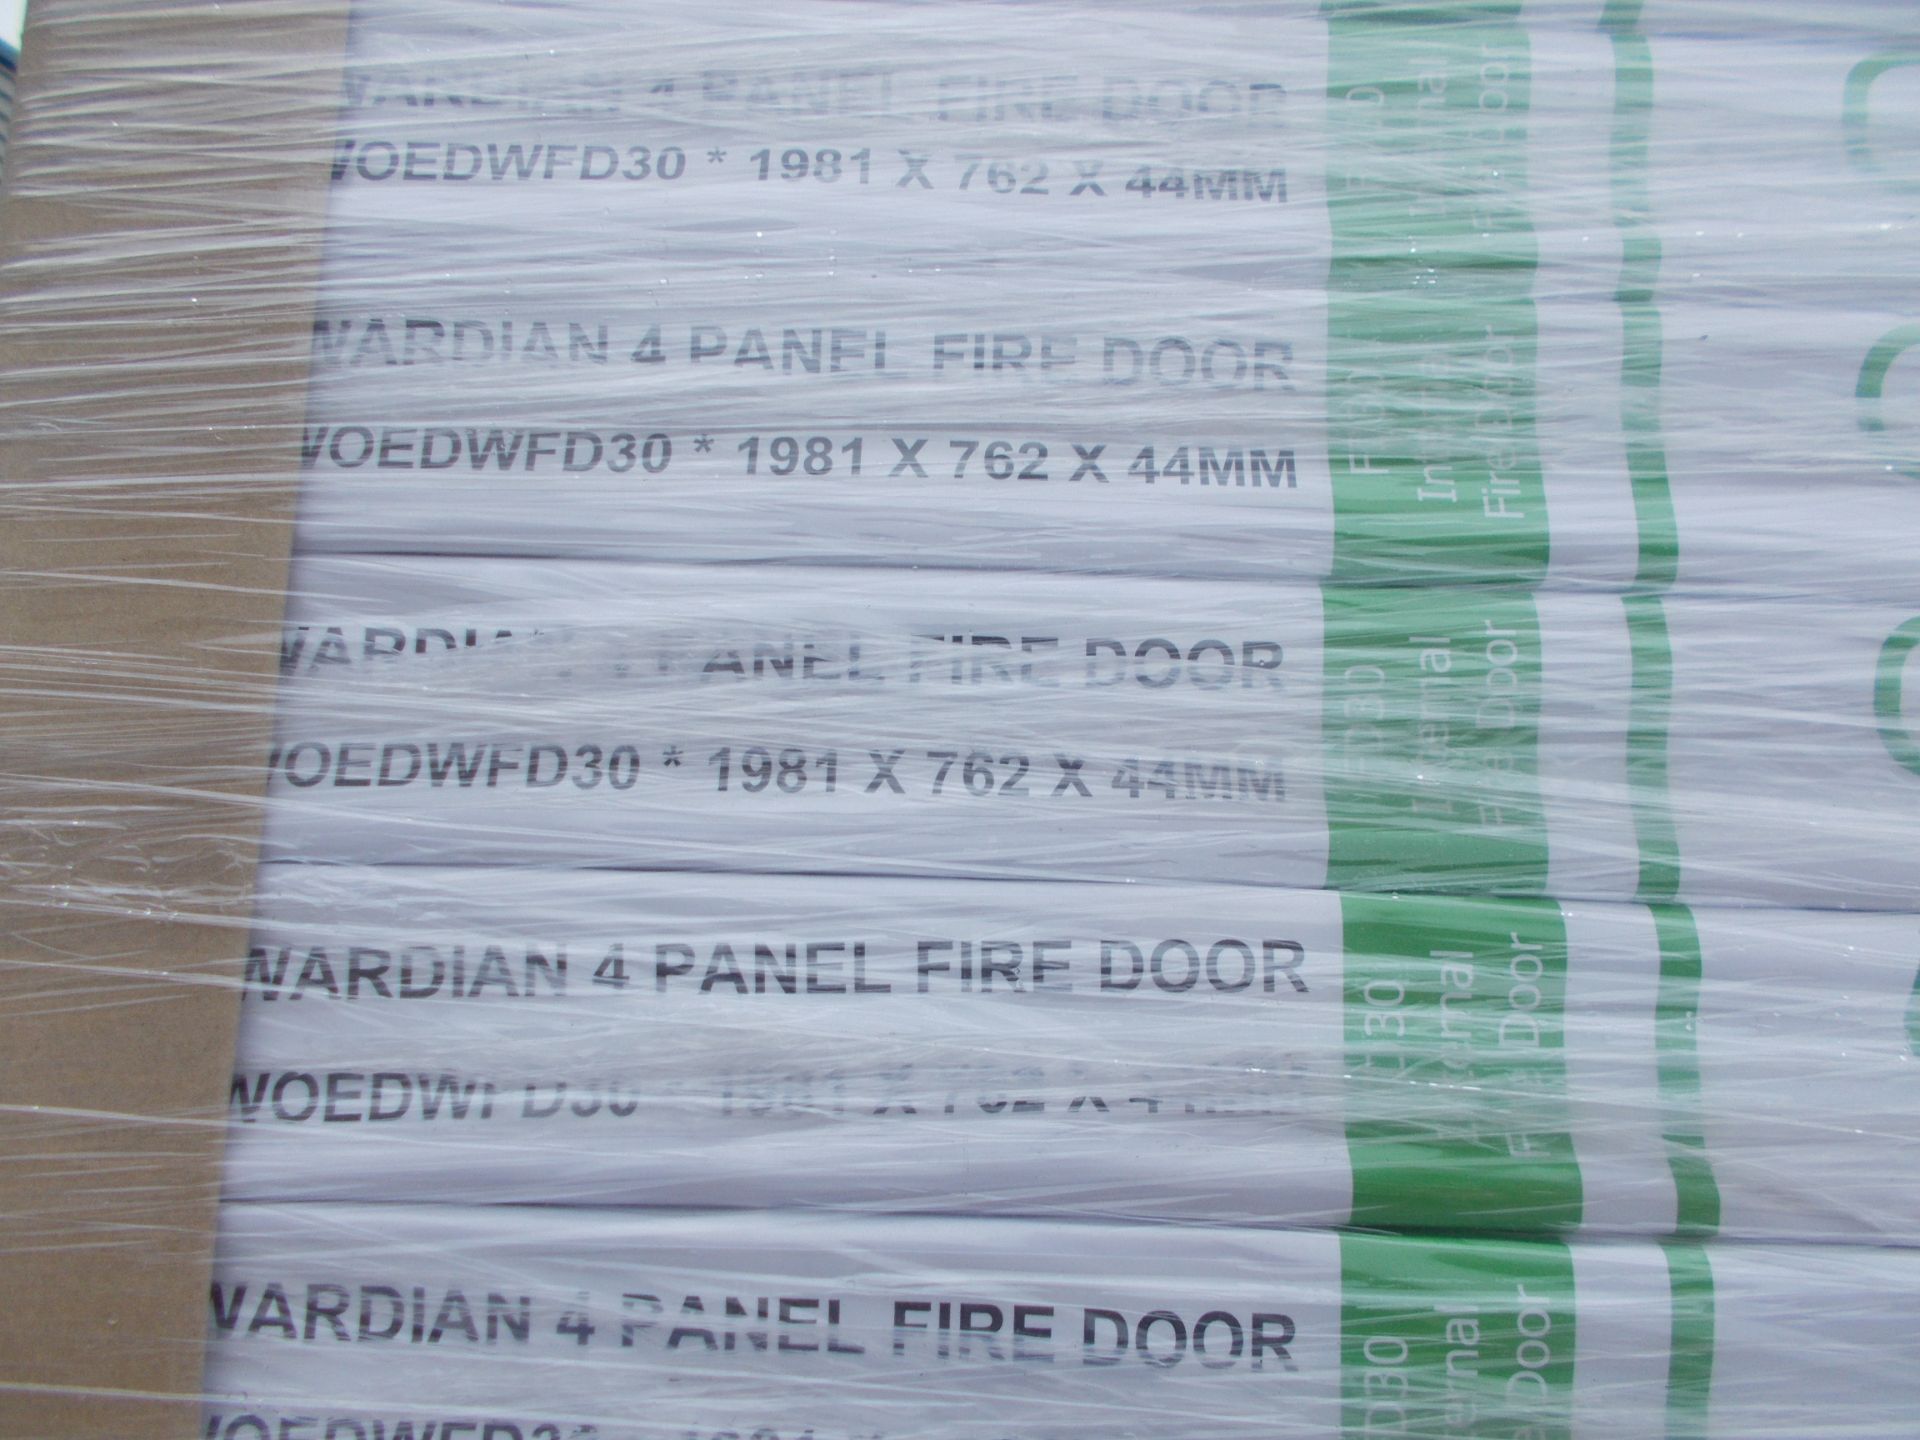 6 x Edwardian 4 Panel Internal Fire Door AW0EDWFD30 1981x762x44mm - Lots to be handed out in order - Image 3 of 3